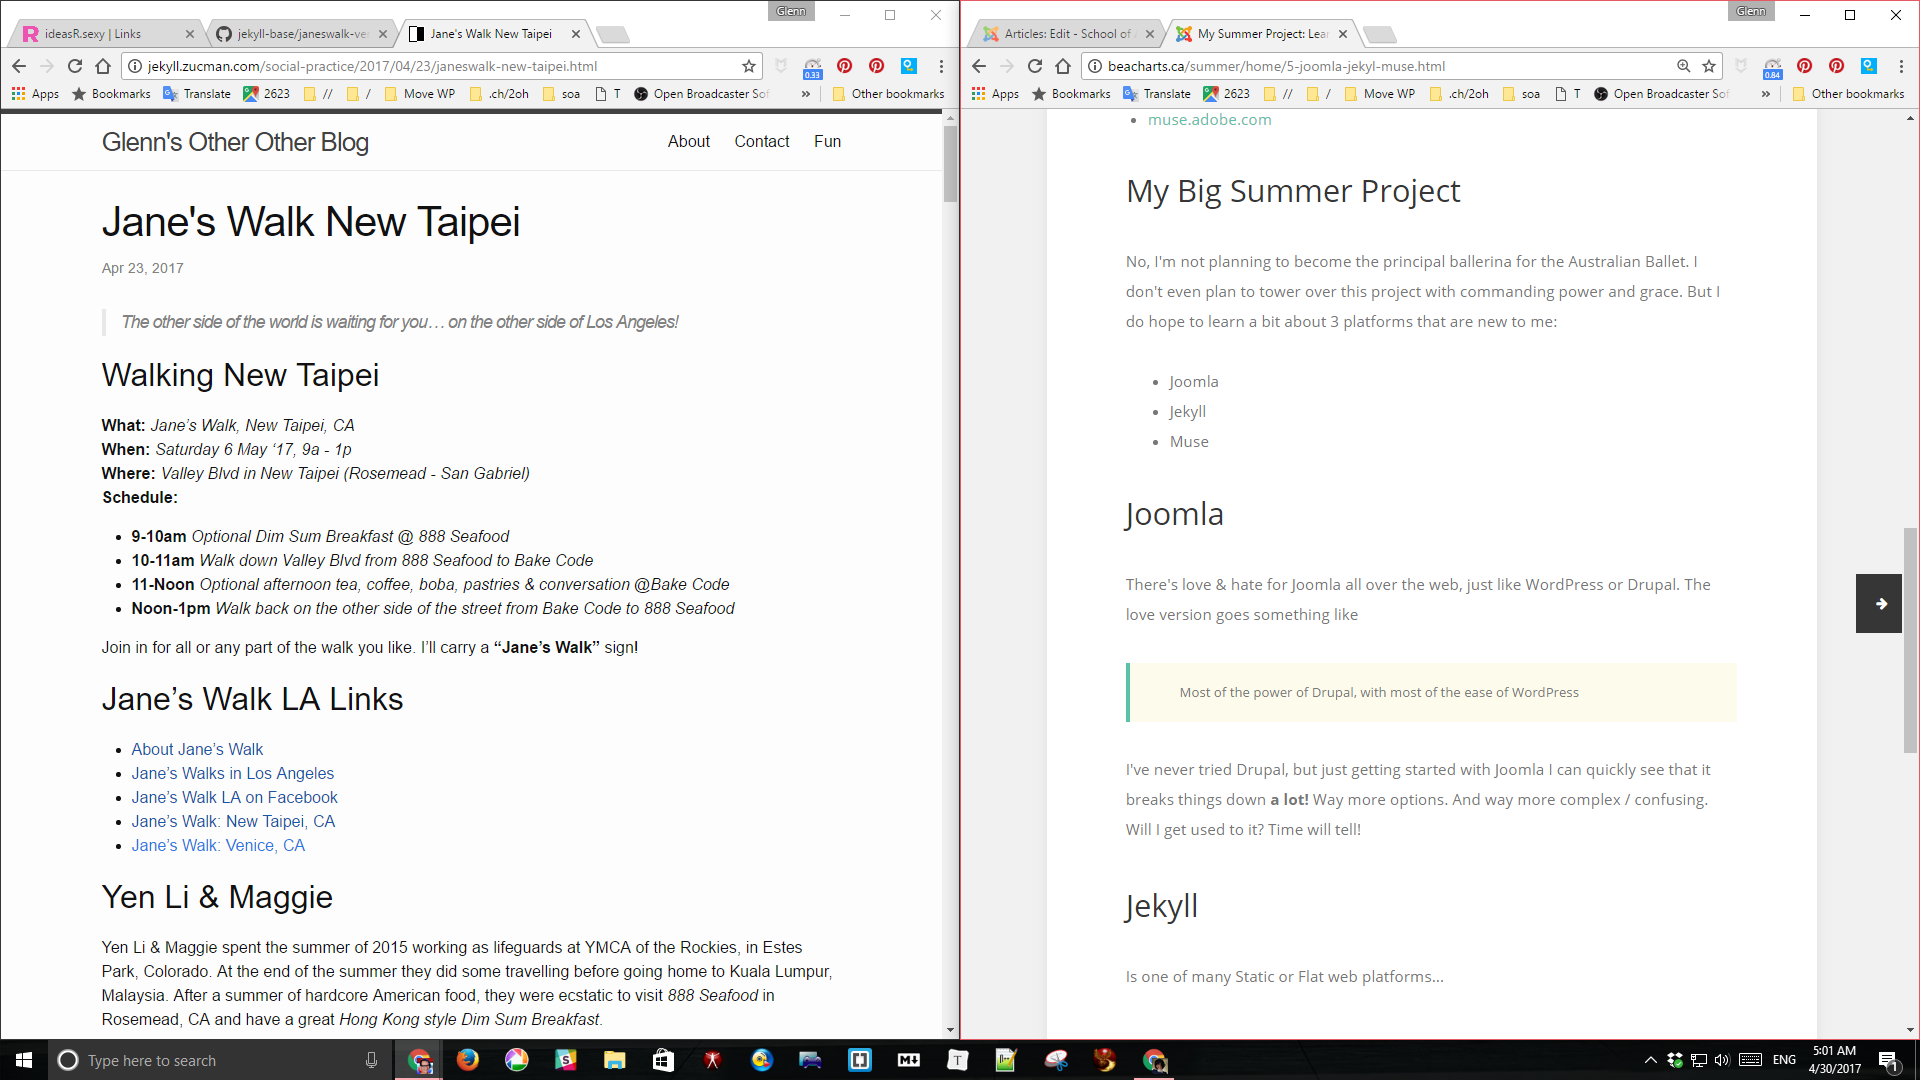 frontends compared a page of Jekyll in a window next to a page of Joomla